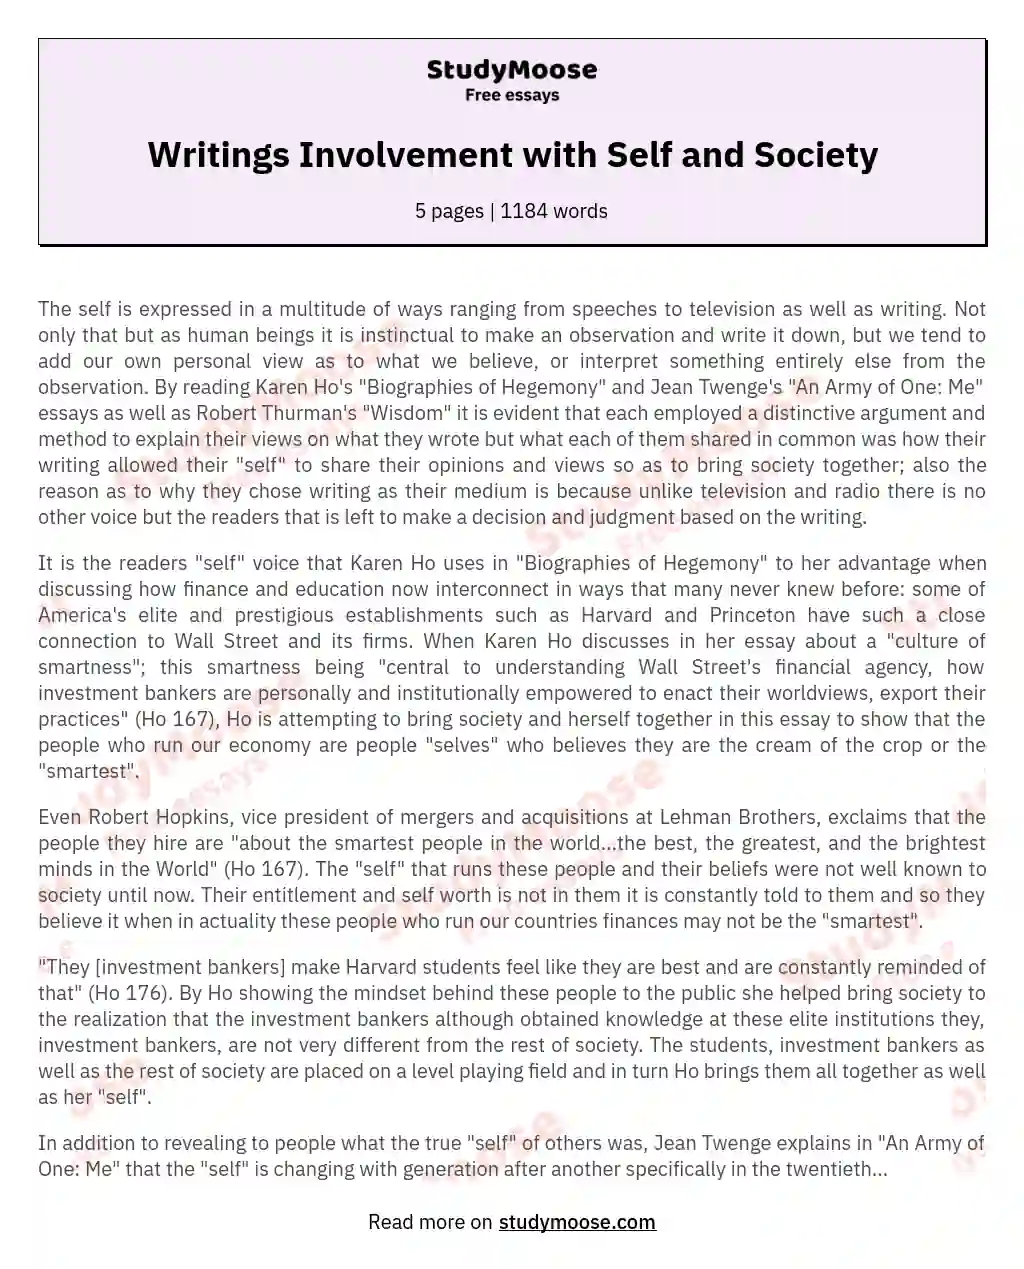 Writings Involvement with Self and Society essay